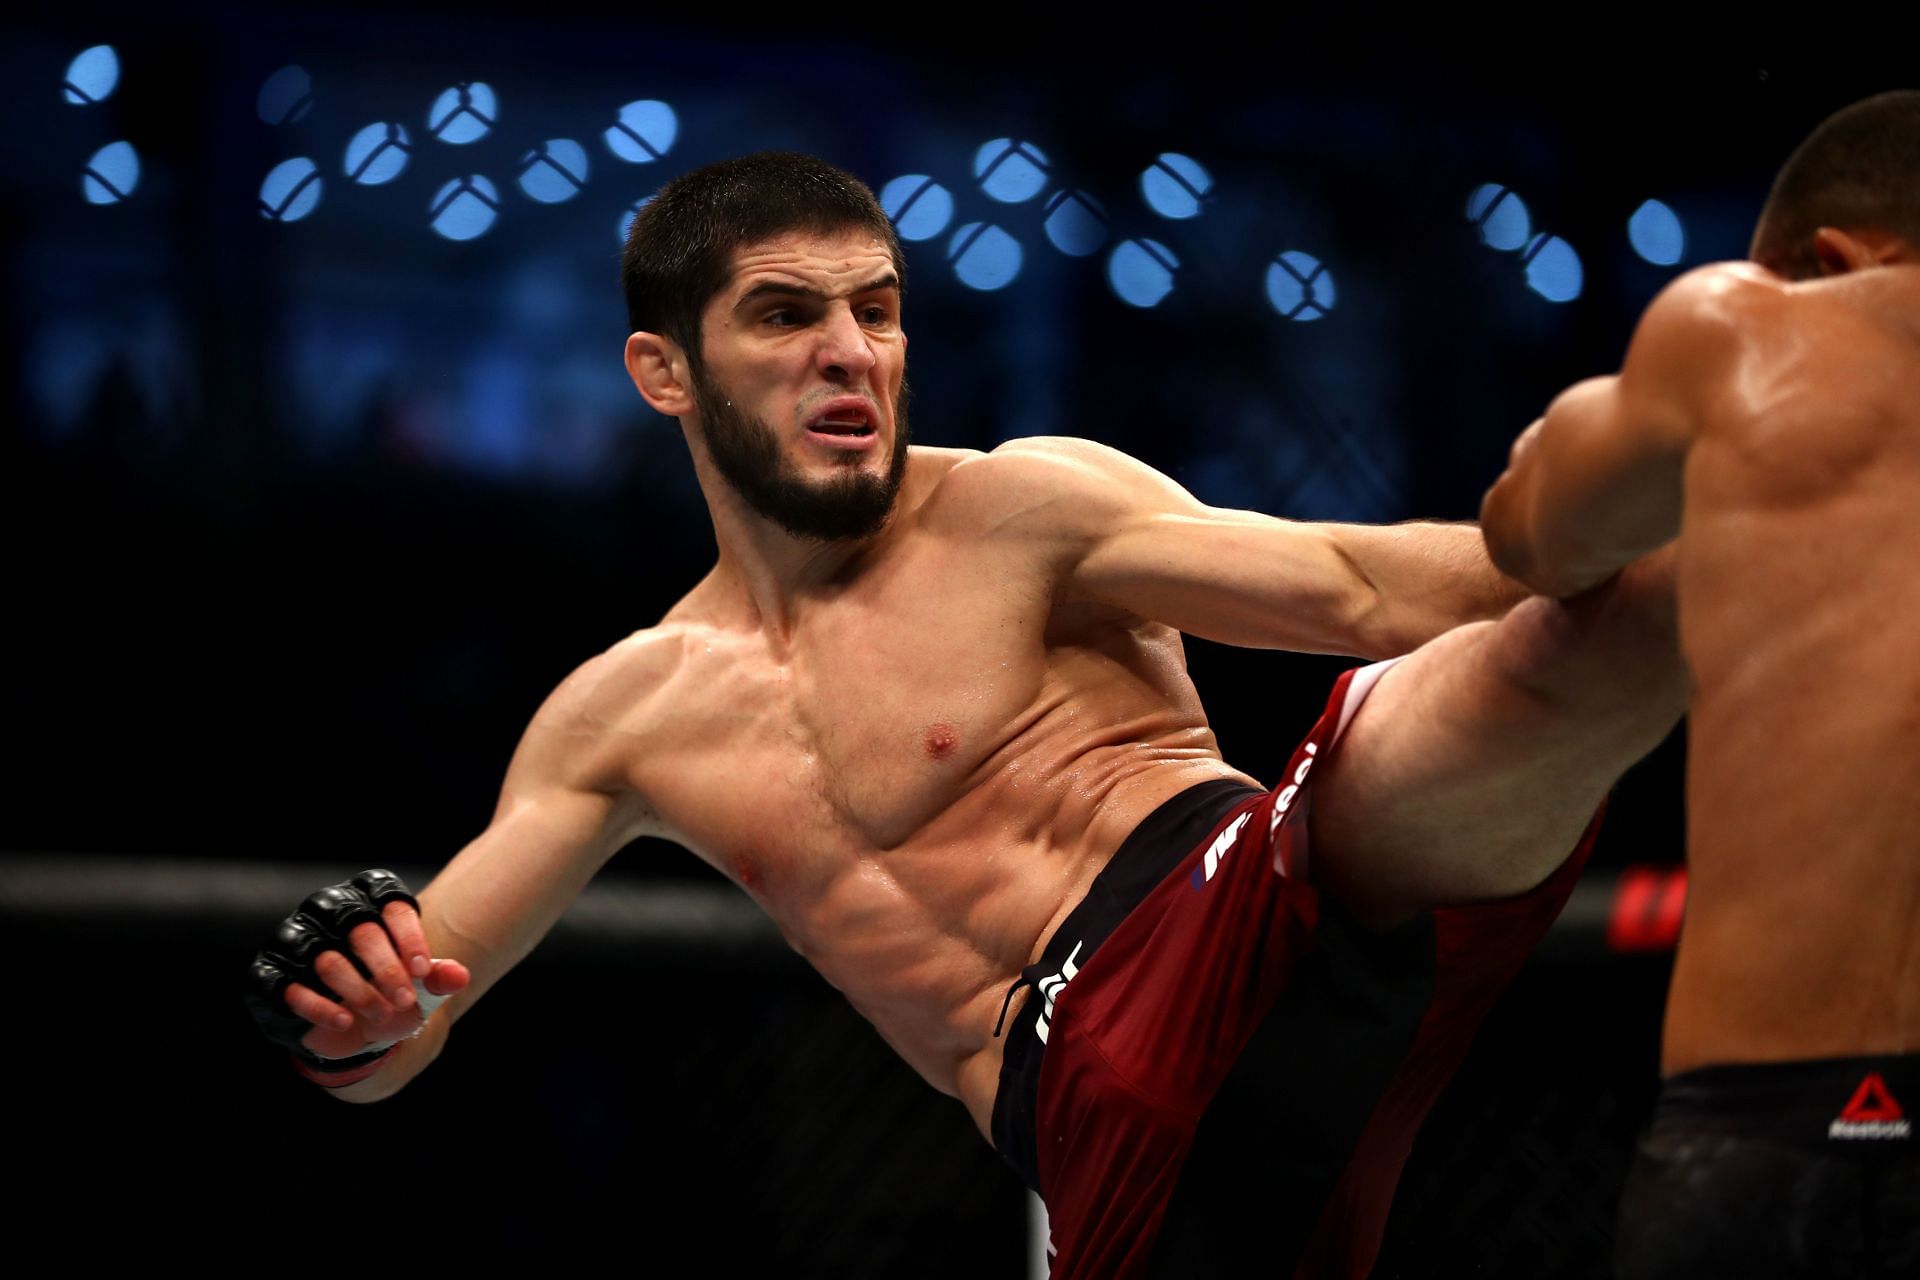 Makhachev has 0 wins against fighters currently ranked in the top 10